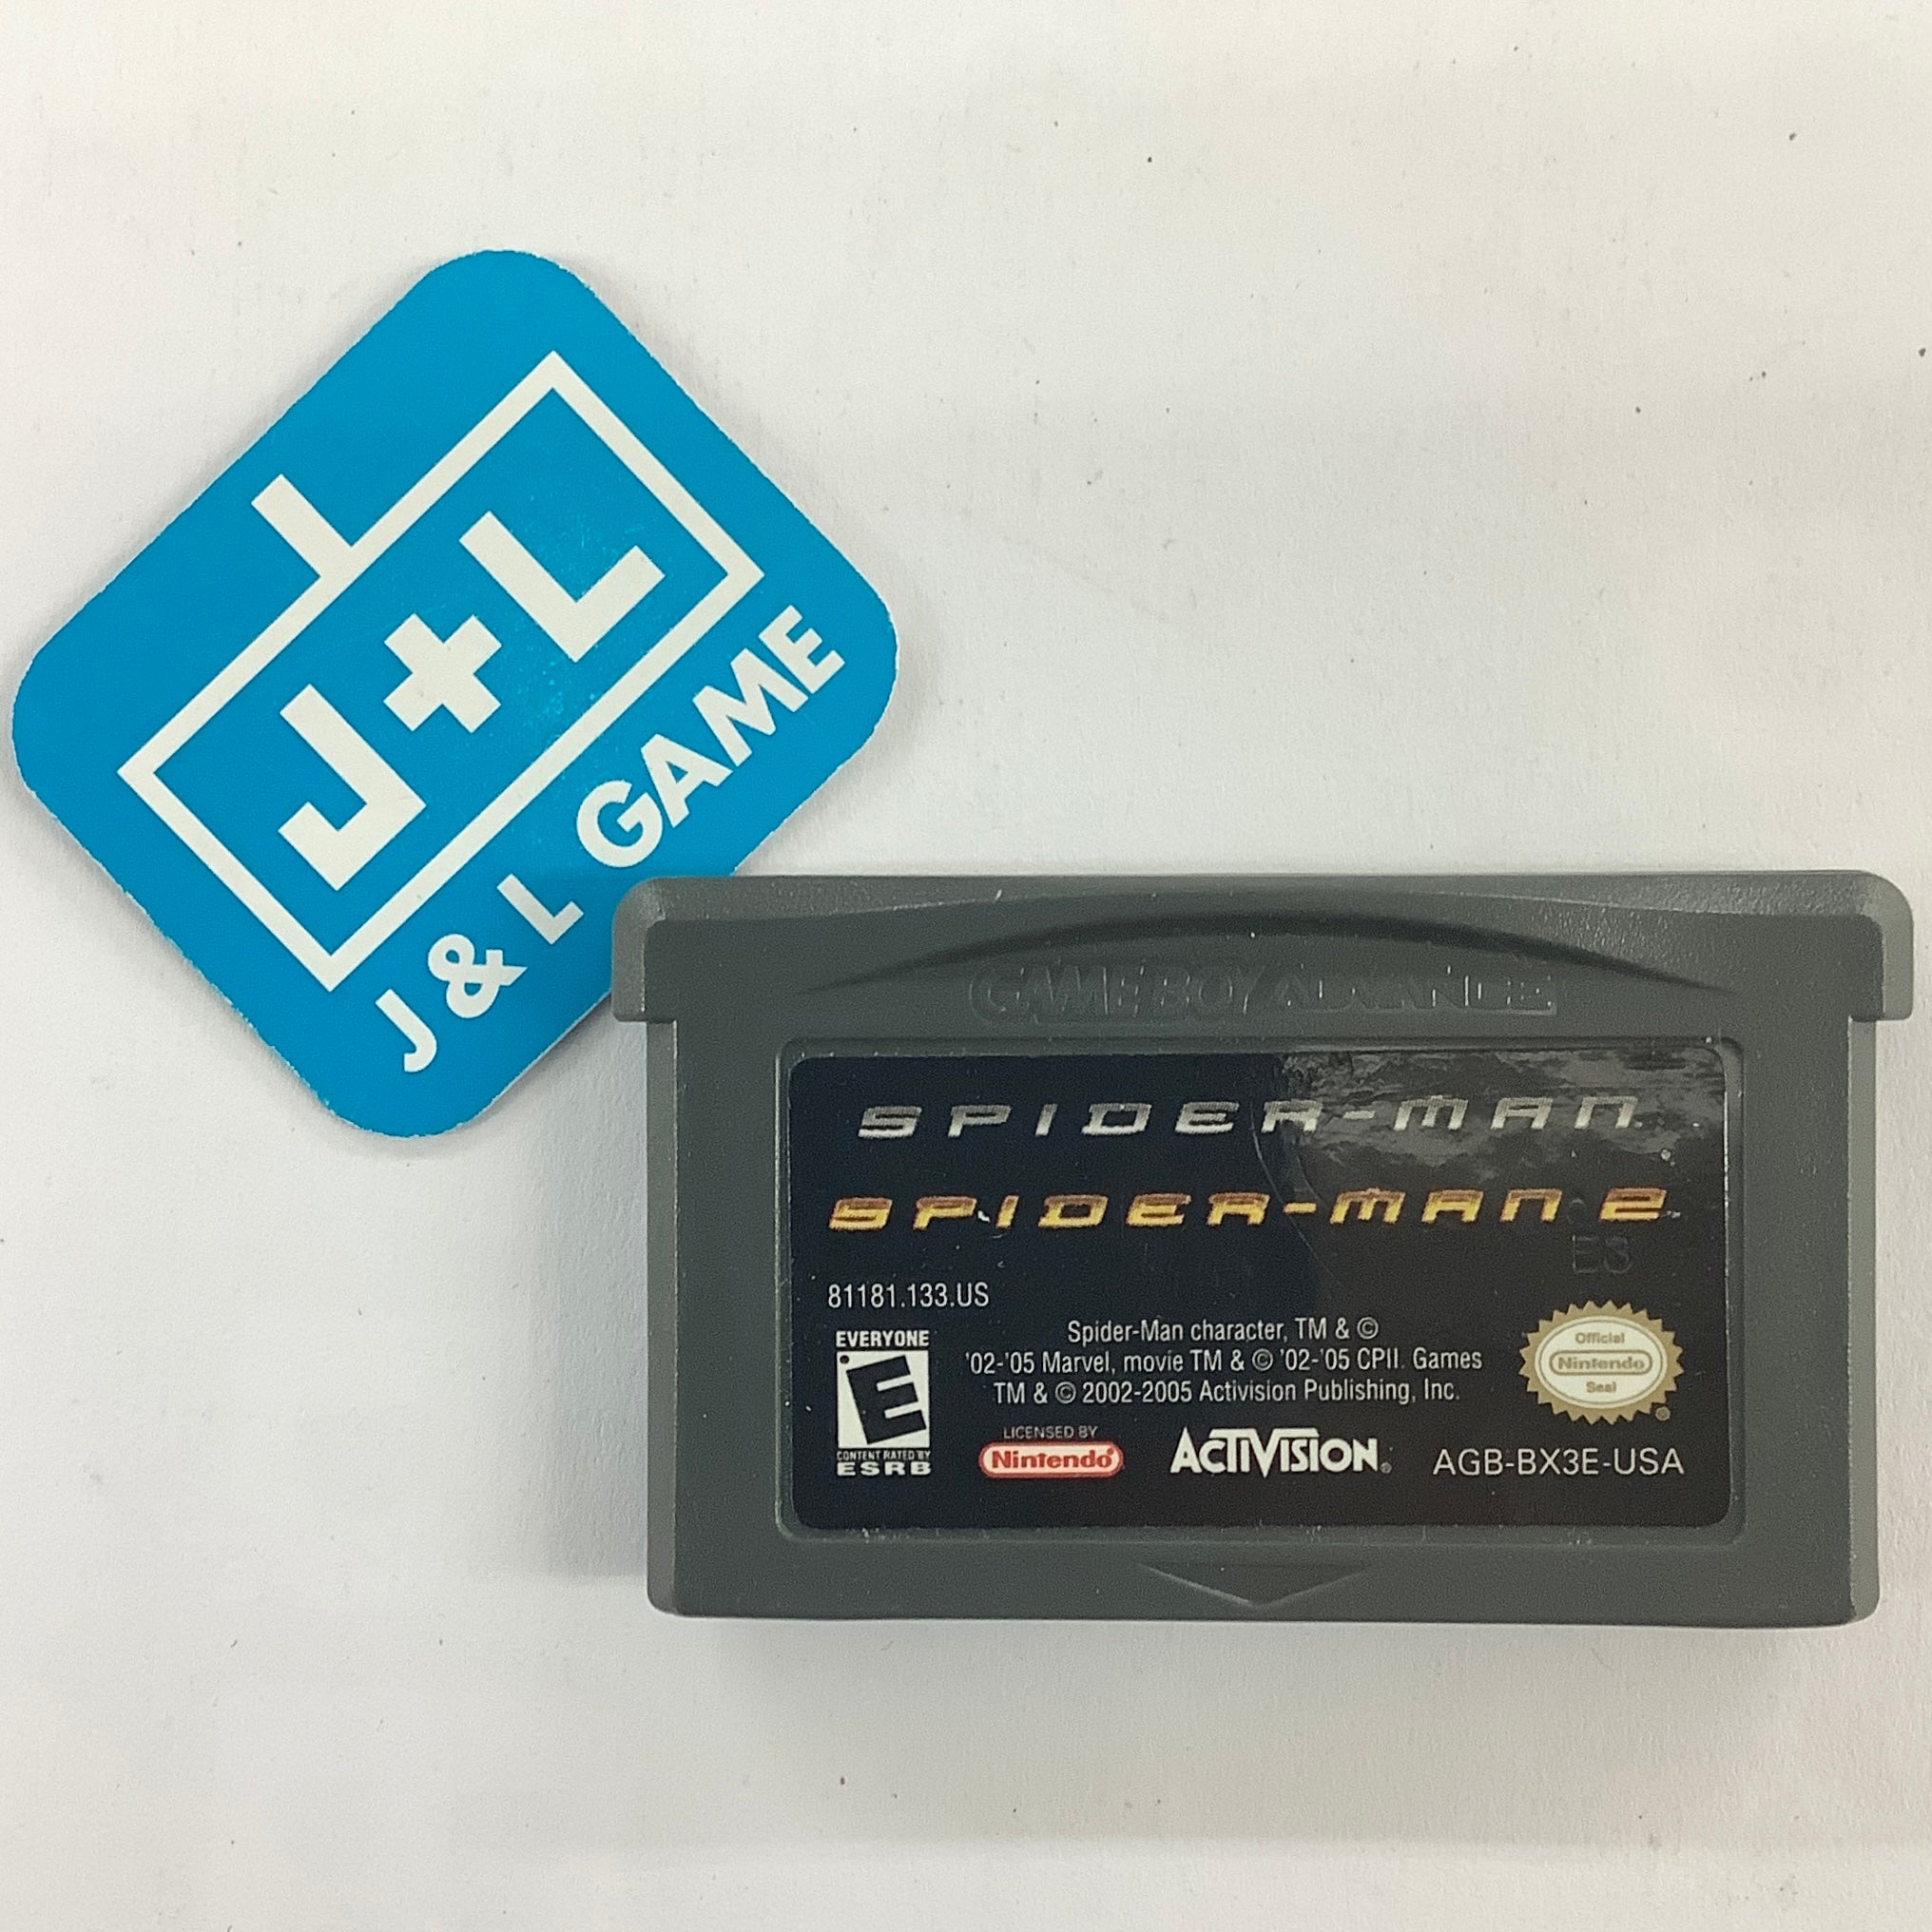 2 In 1 Game Pack: Spider-Man / Spider-Man 2 - (GBA) Game Boy Advance [Pre-Owned] Video Games Activision   